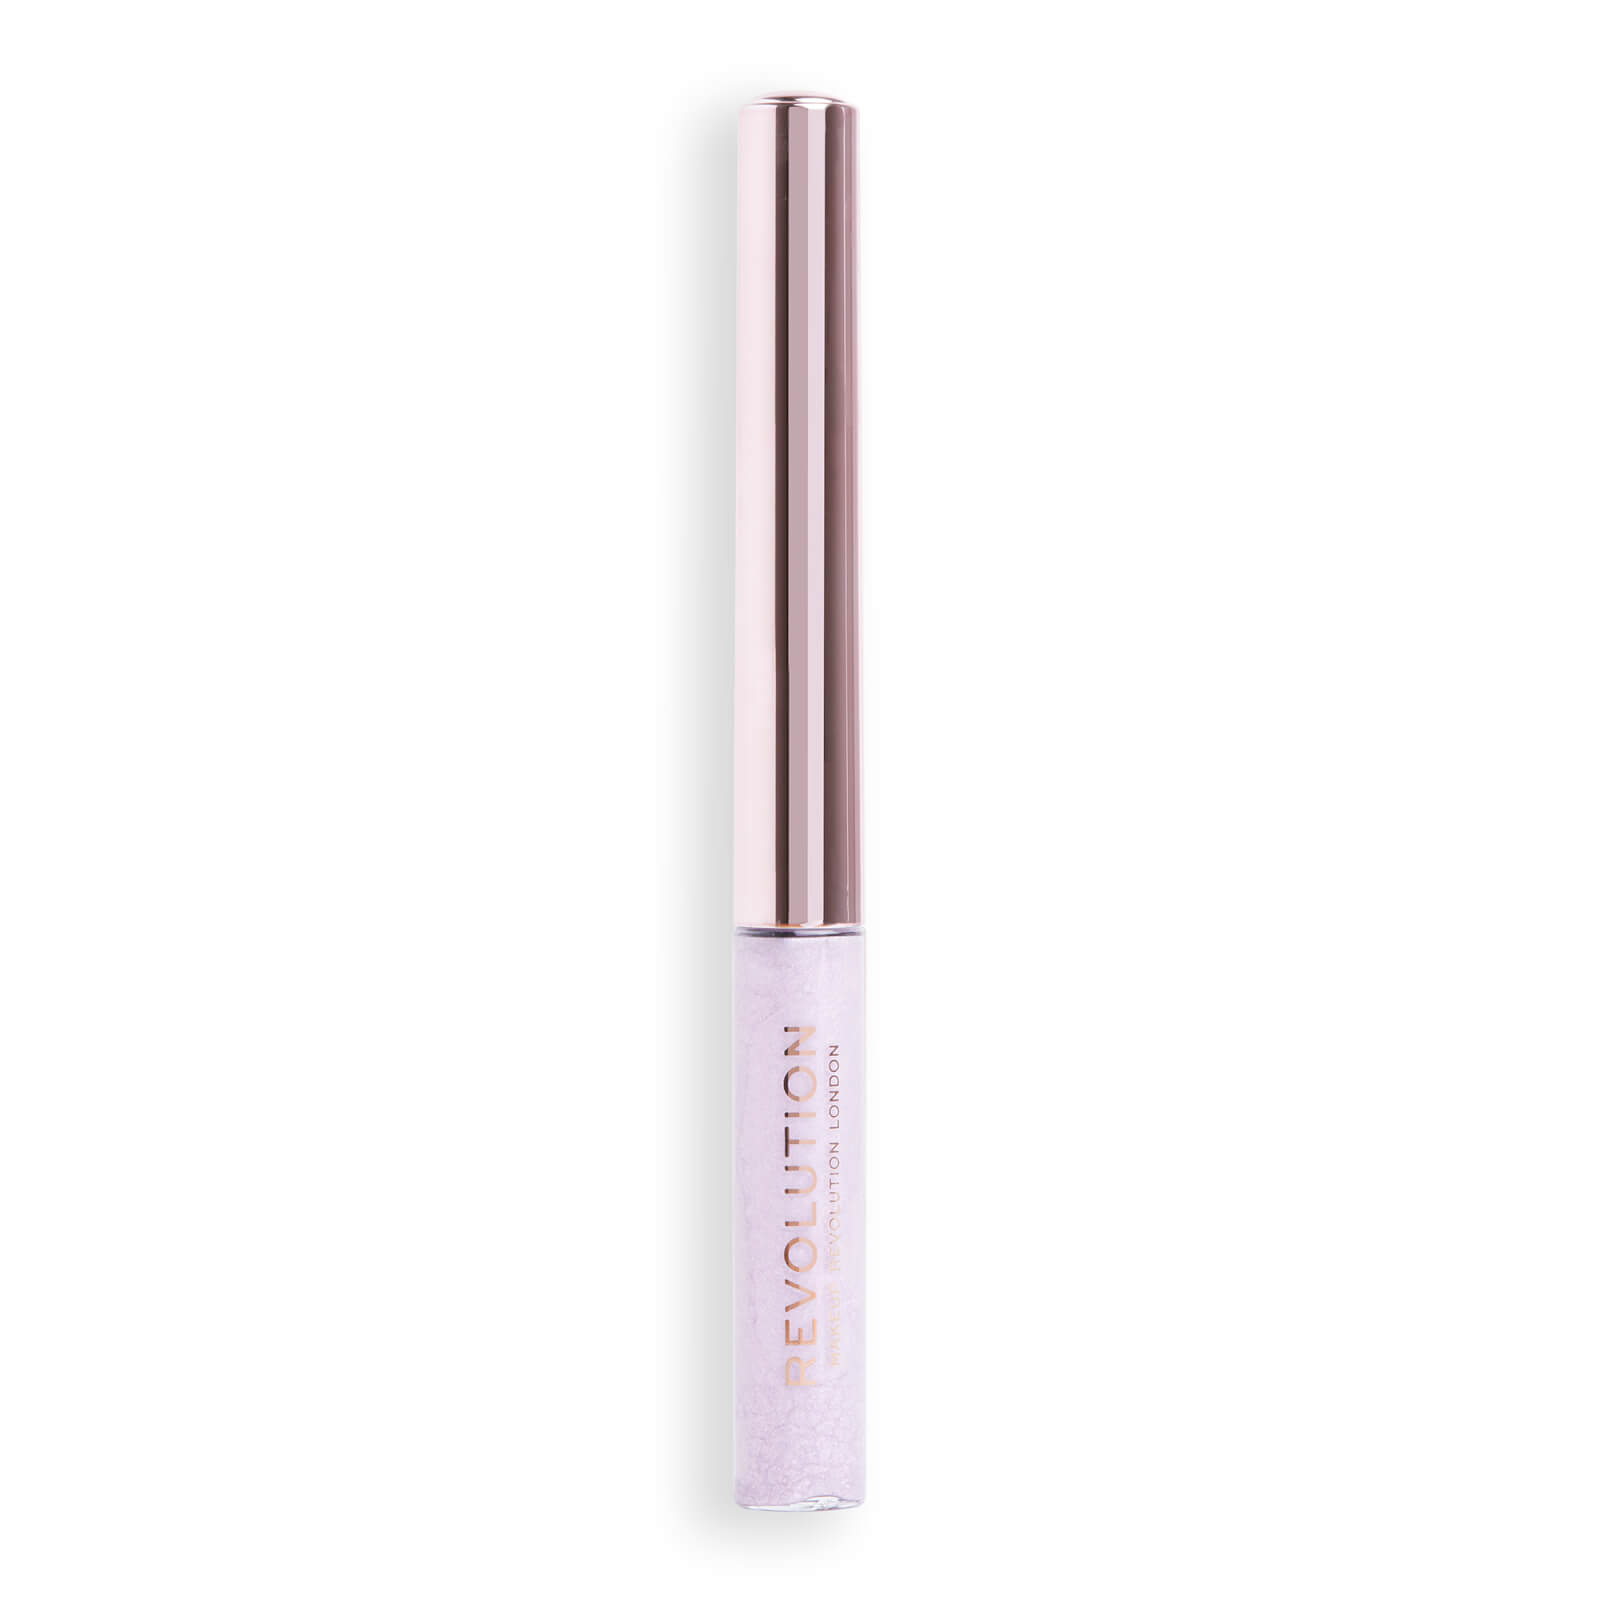 Revolution Festive Allure Chromatic Liner 2.4ml (various Shades) - Lilac Lustre In Lilac Lustre